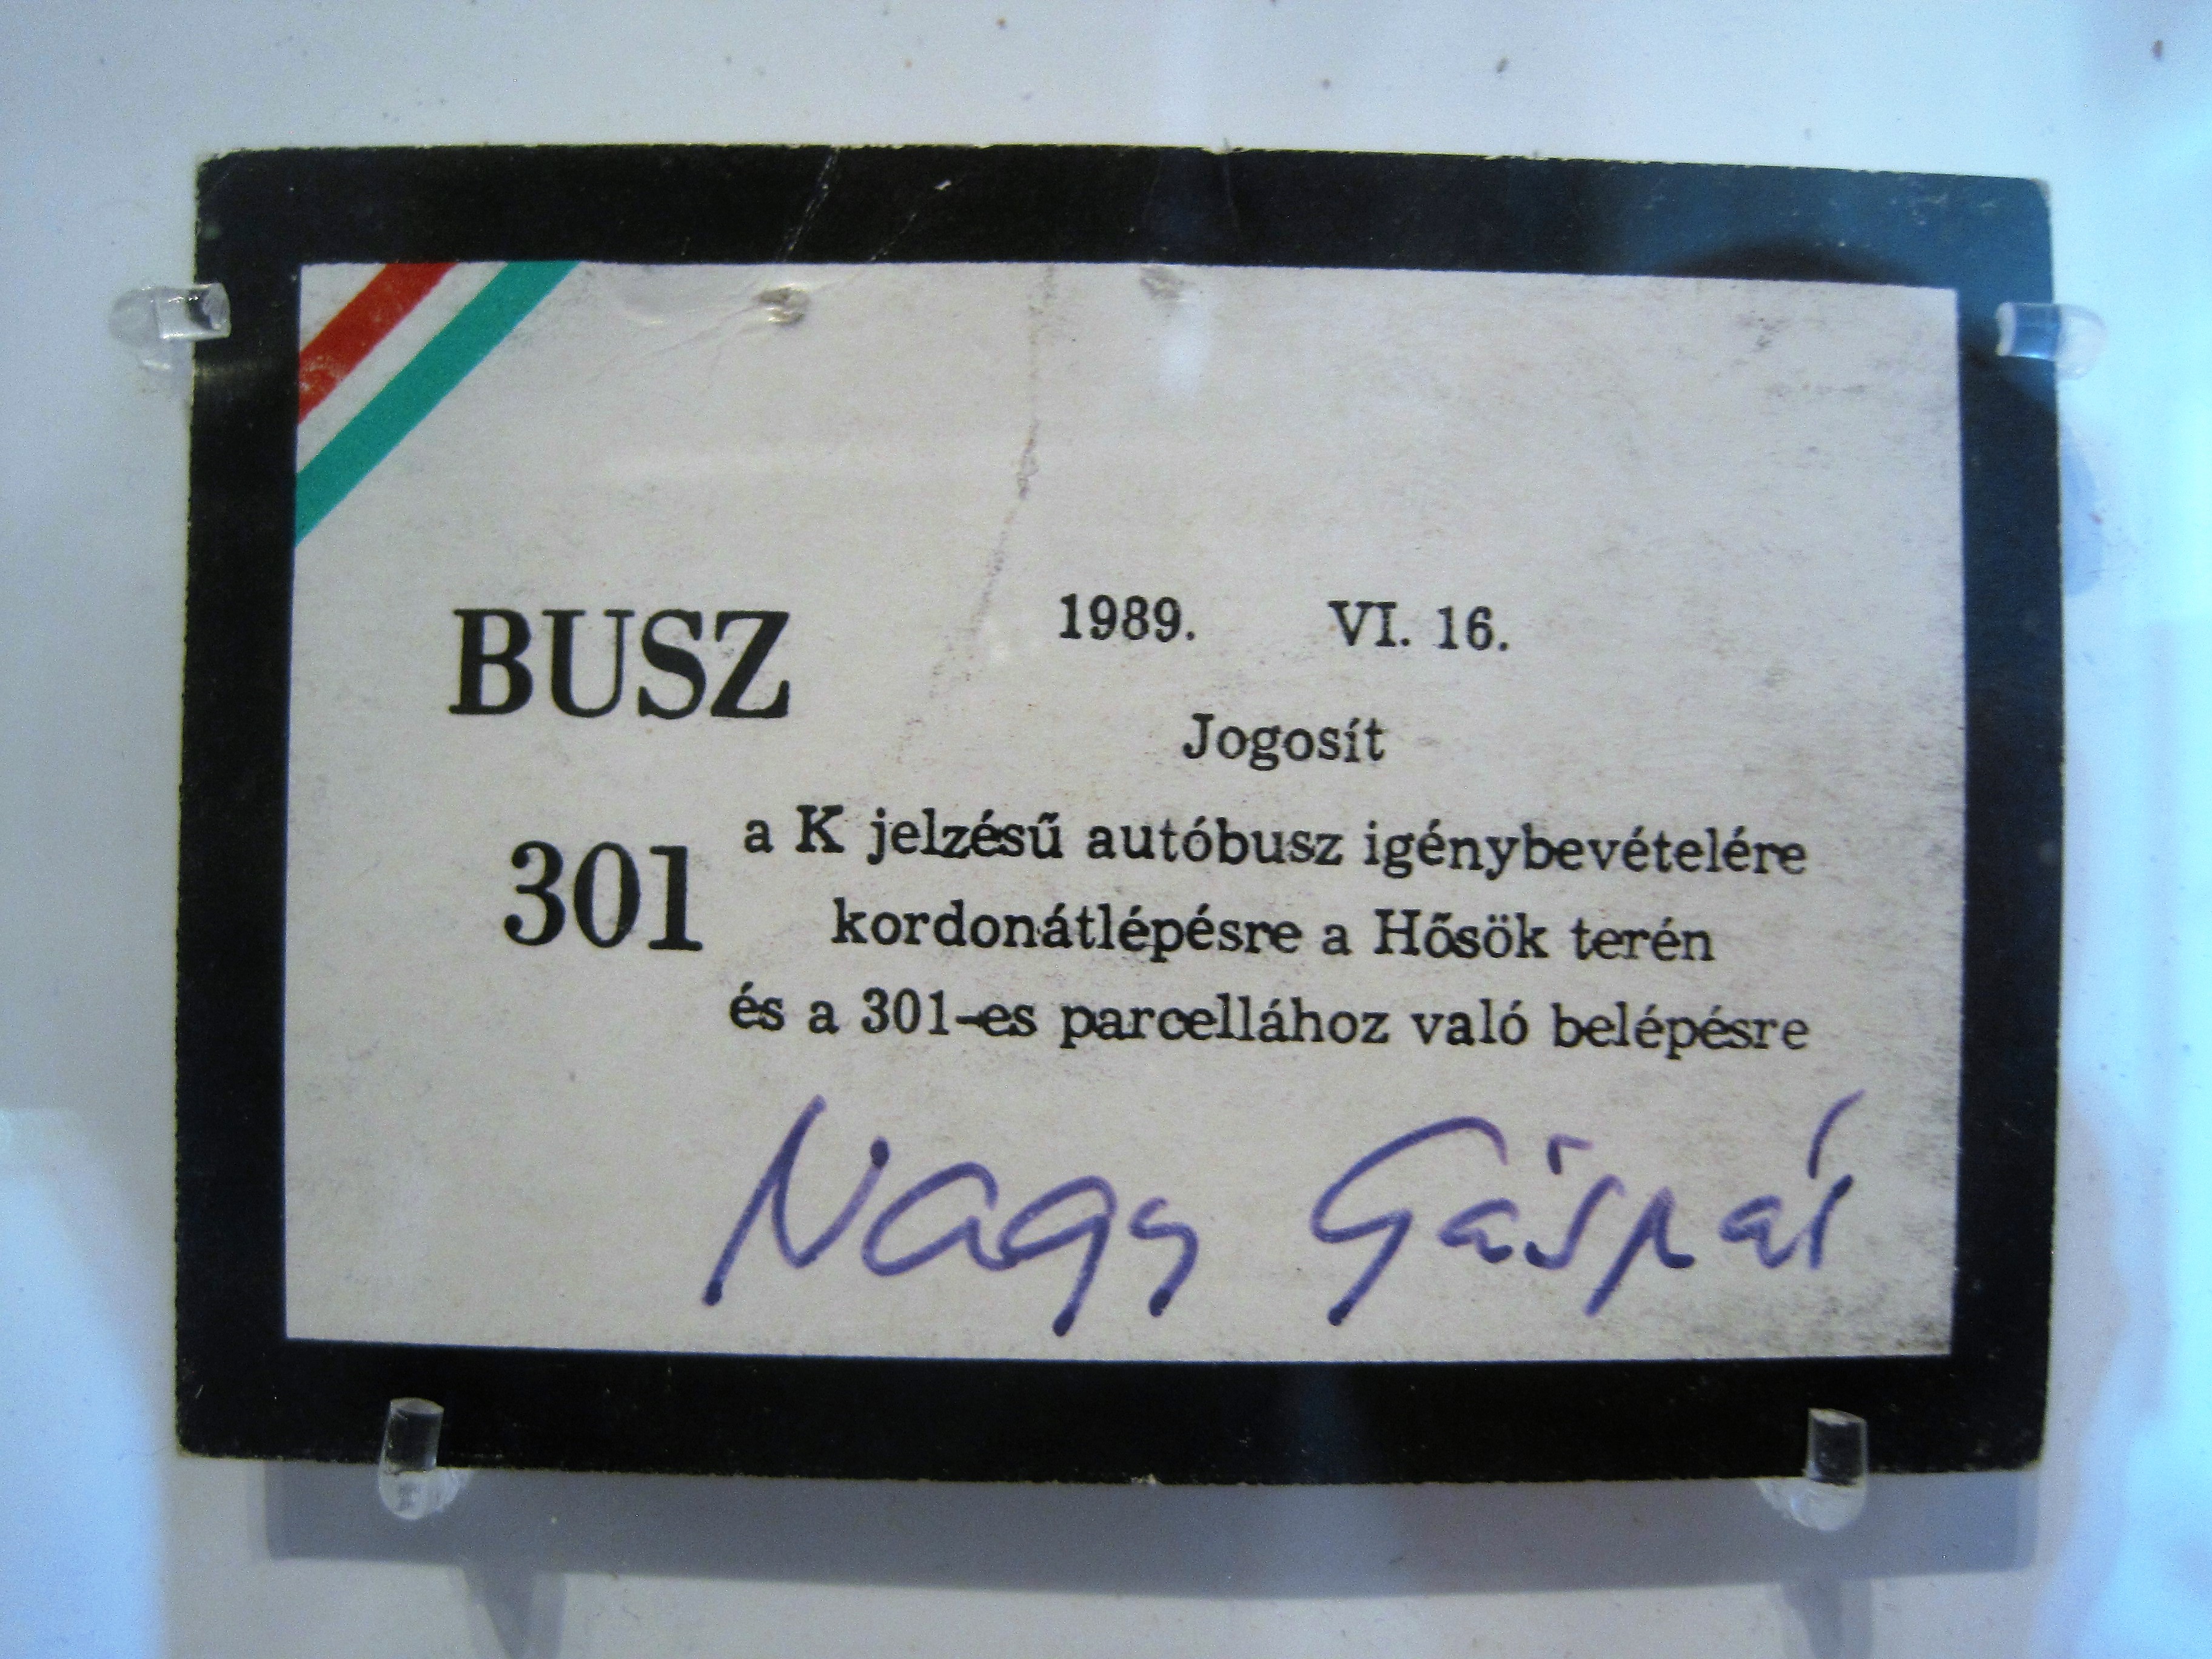 The pass of Gáspár Nagy to approach parcel 301 in the New Public Cemetery where Imre Nagy and his partners were buried and reburied on 16 June 1989.